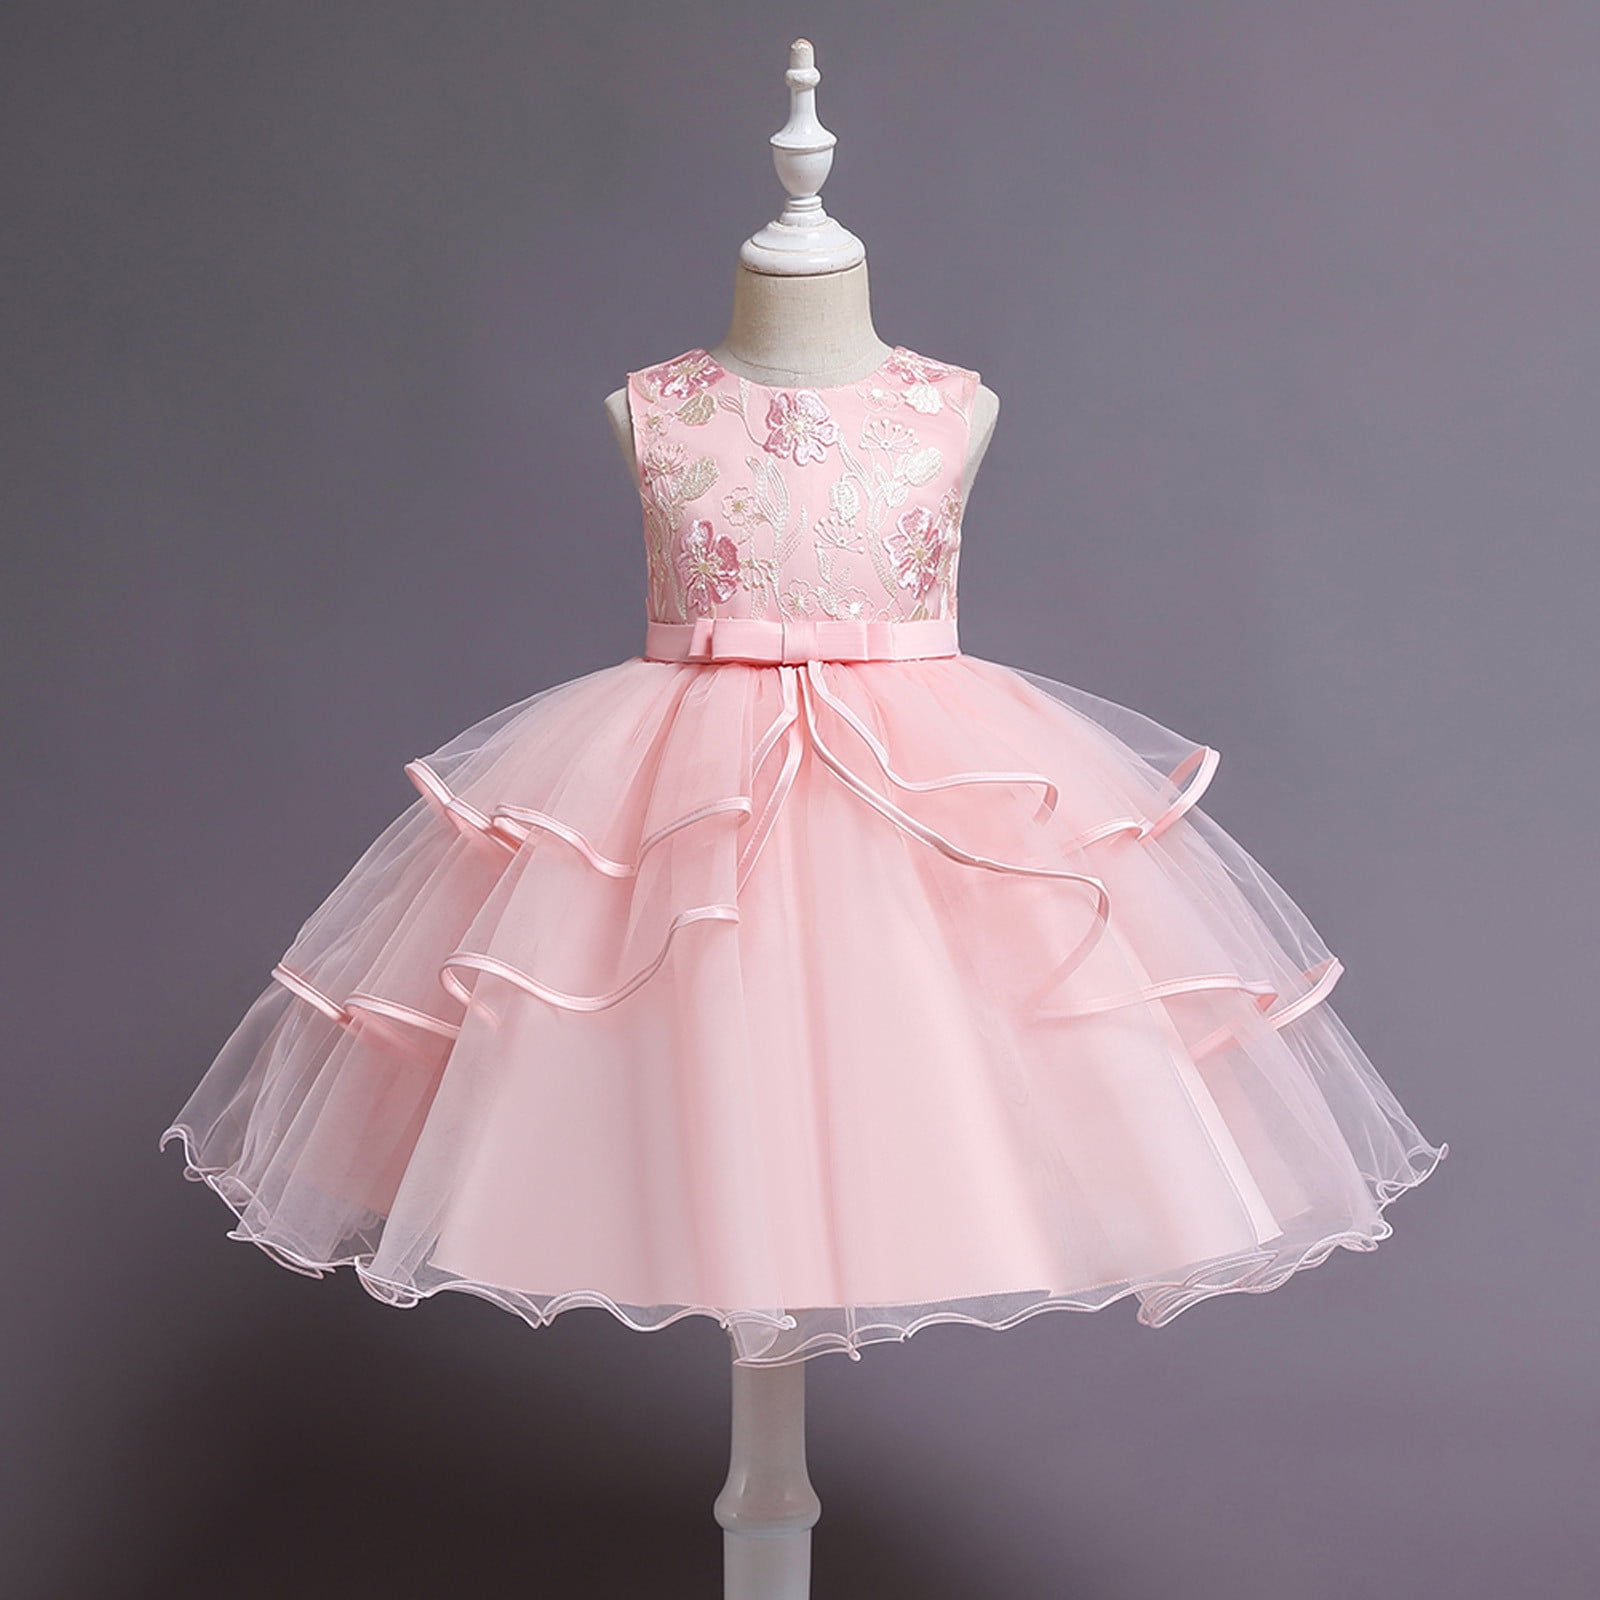 Kids' Couture Rental Gowns | Bentley and Lace